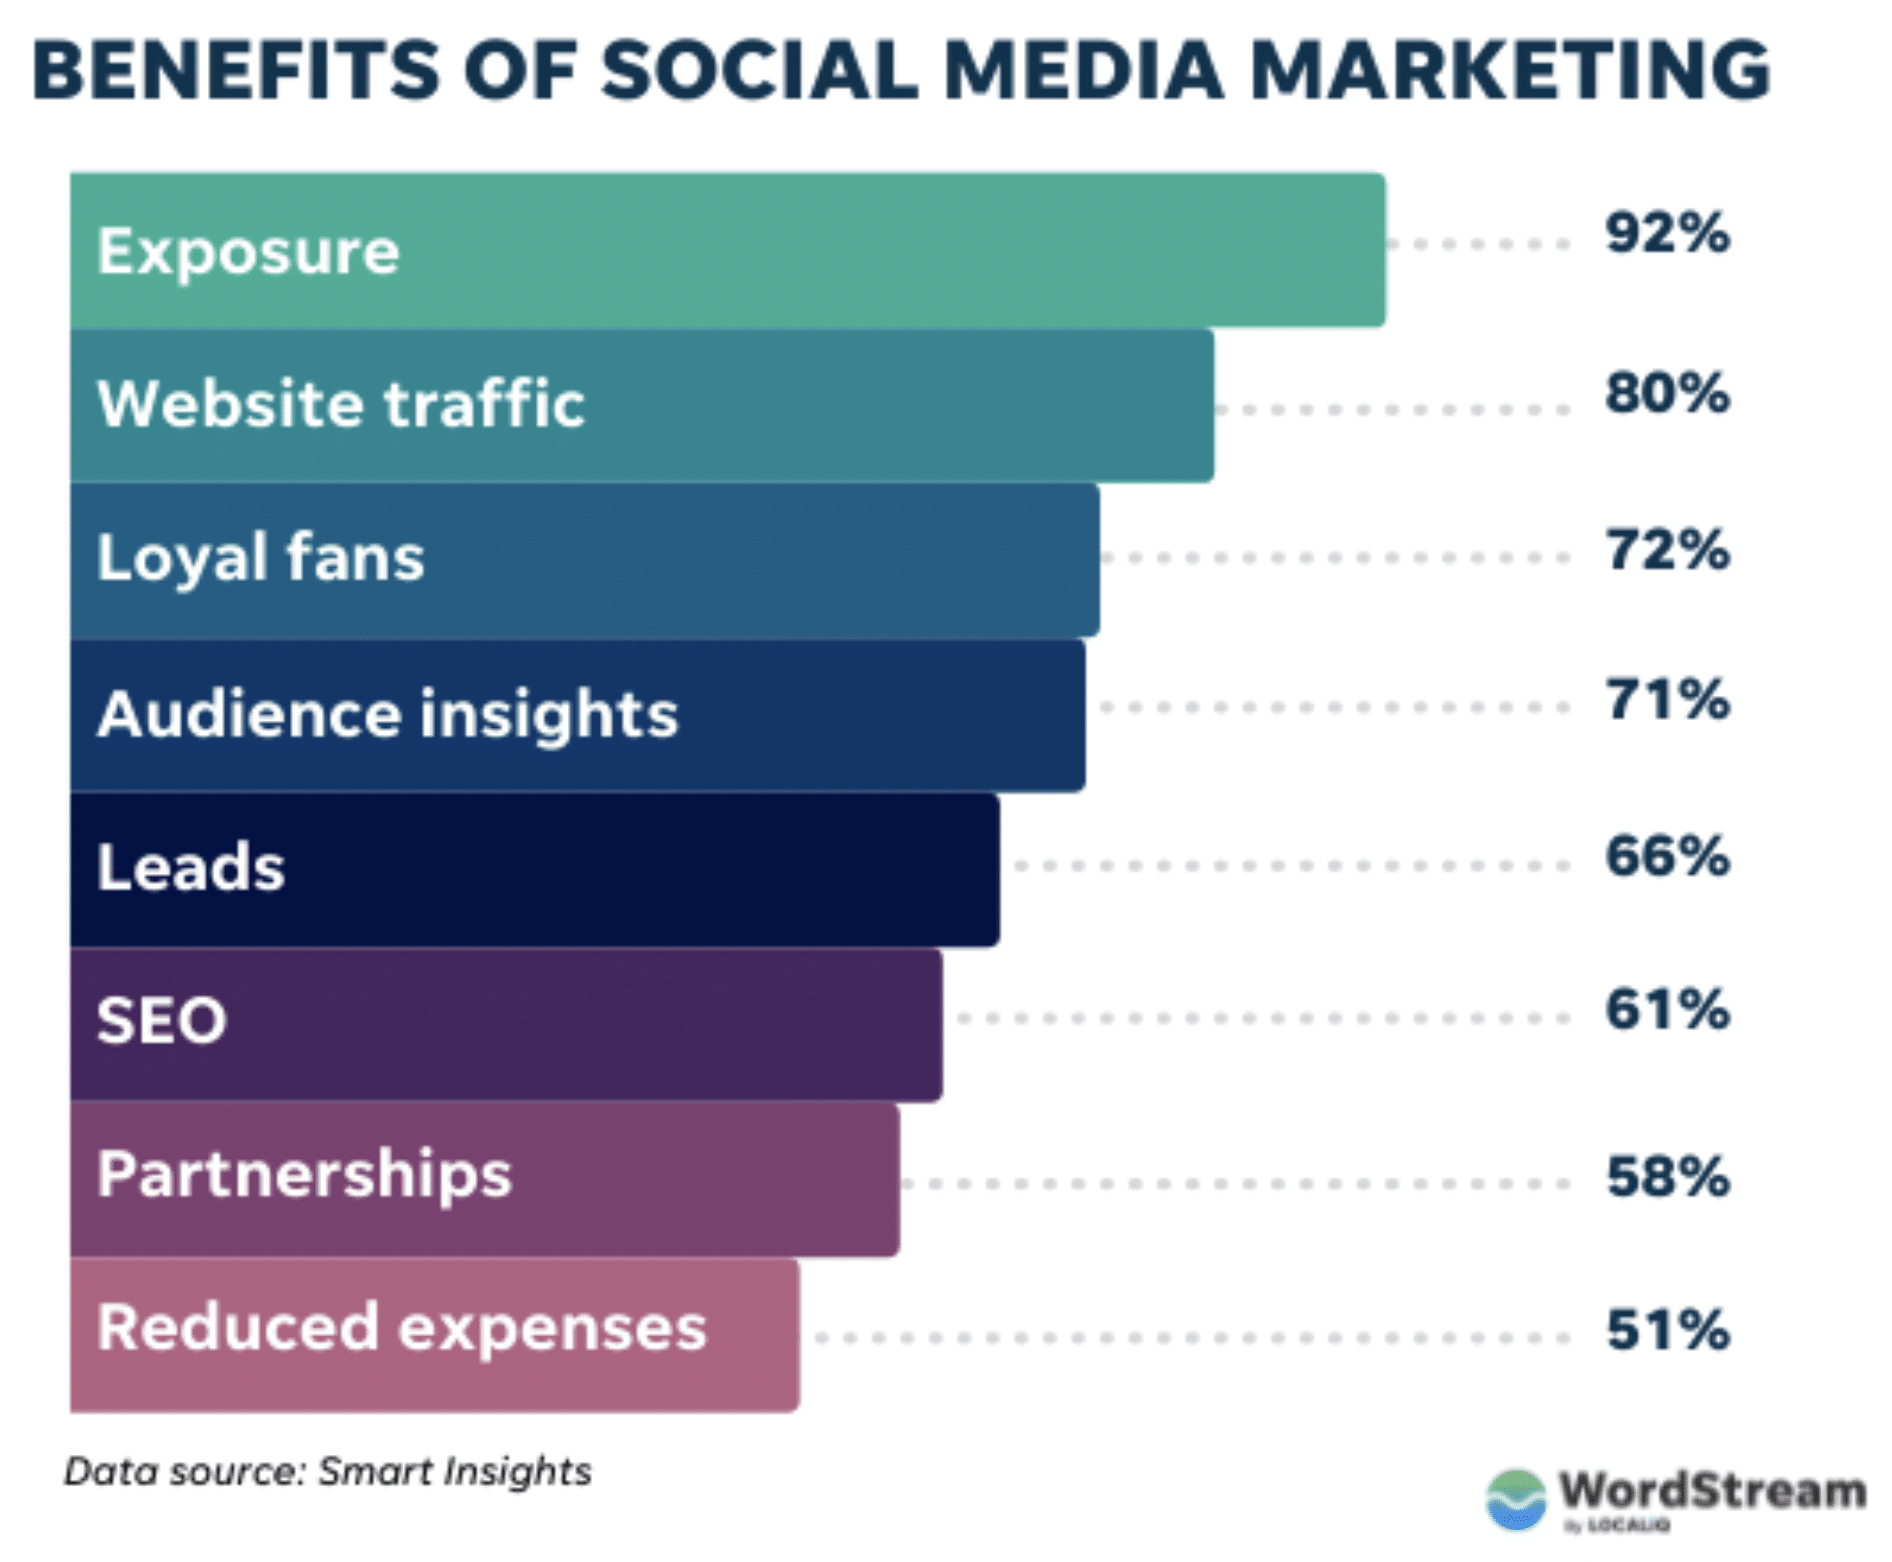 graphic shows percentage of businesses who saw benefits of social media marketing